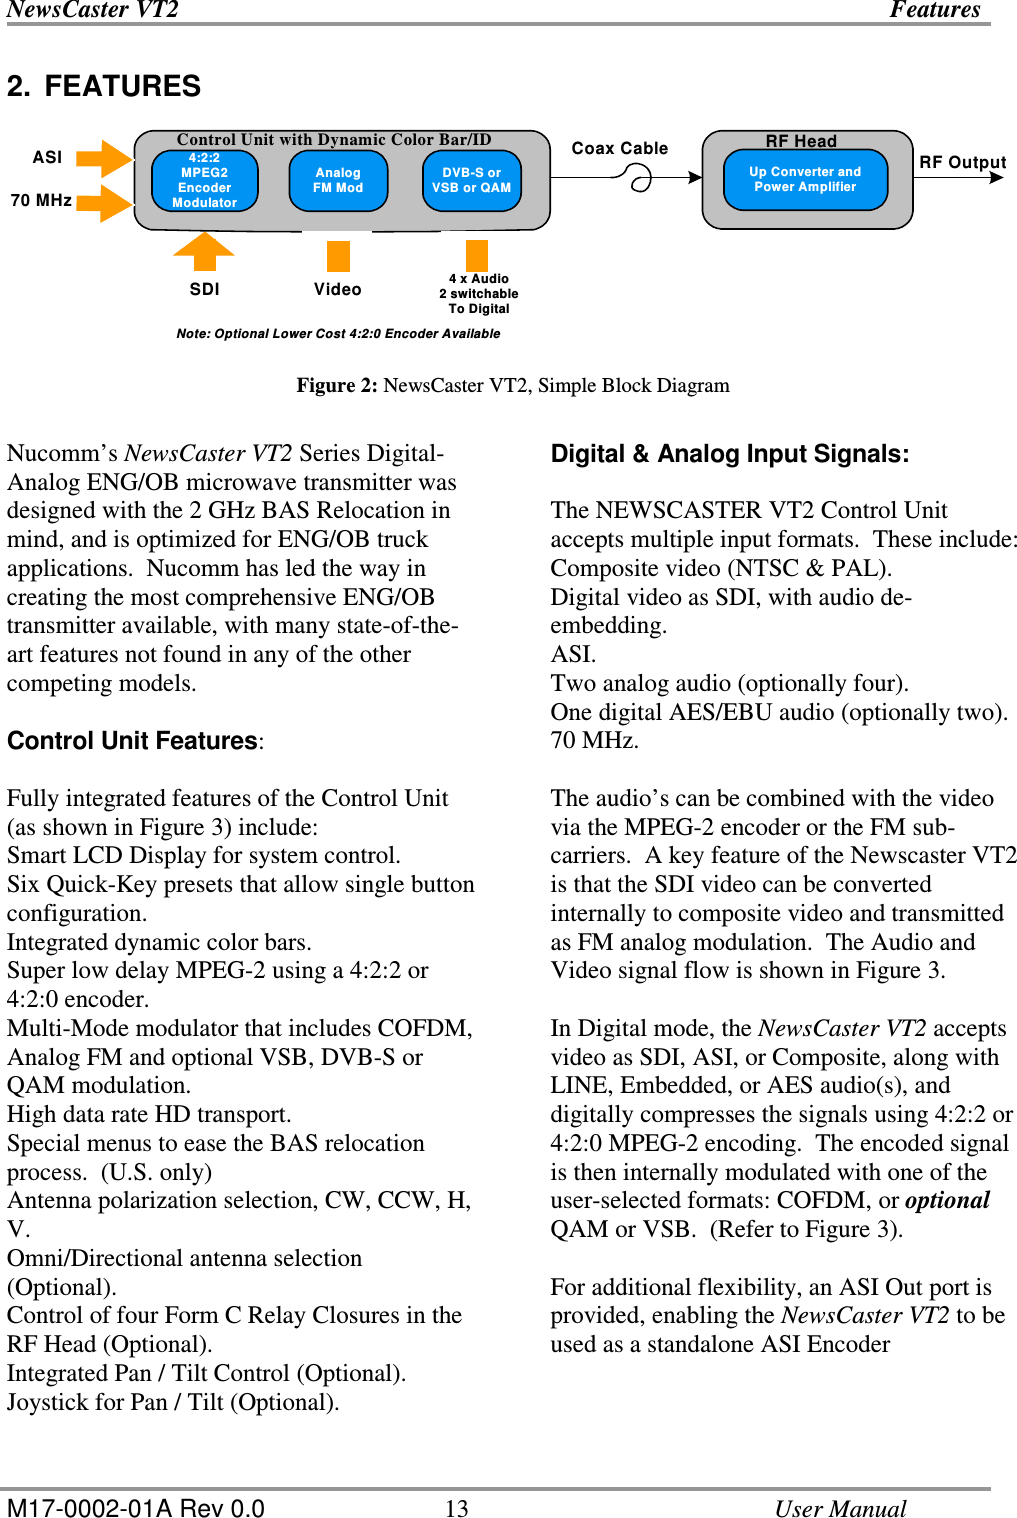 NewsCaster VT2    Features  M17-0002-01A Rev 0.0  13    User Manual 2.  FEATURES       Figure 2: NewsCaster VT2, Simple Block Diagram  Nucomm’s NewsCaster VT2 Series Digital-Analog ENG/OB microwave transmitter was designed with the 2 GHz BAS Relocation in mind, and is optimized for ENG/OB truck applications.  Nucomm has led the way in creating the most comprehensive ENG/OB transmitter available, with many state-of-the-art features not found in any of the other competing models.  Control Unit Features:  Fully integrated features of the Control Unit (as shown in Figure 3) include: Smart LCD Display for system control. Six Quick-Key presets that allow single button configuration. Integrated dynamic color bars. Super low delay MPEG-2 using a 4:2:2 or 4:2:0 encoder. Multi-Mode modulator that includes COFDM, Analog FM and optional VSB, DVB-S or QAM modulation. High data rate HD transport. Special menus to ease the BAS relocation process.  (U.S. only) Antenna polarization selection, CW, CCW, H, V. Omni/Directional antenna selection (Optional). Control of four Form C Relay Closures in the RF Head (Optional). Integrated Pan / Tilt Control (Optional). Joystick for Pan / Tilt (Optional).  Digital &amp; Analog Input Signals:  The NEWSCASTER VT2 Control Unit accepts multiple input formats.  These include: Composite video (NTSC &amp; PAL). Digital video as SDI, with audio de-embedding. ASI. Two analog audio (optionally four). One digital AES/EBU audio (optionally two). 70 MHz.  The audio’s can be combined with the video via the MPEG-2 encoder or the FM sub-carriers.  A key feature of the Newscaster VT2 is that the SDI video can be converted internally to composite video and transmitted as FM analog modulation.  The Audio and Video signal flow is shown in Figure 3.  In Digital mode, the NewsCaster VT2 accepts video as SDI, ASI, or Composite, along with LINE, Embedded, or AES audio(s), and digitally compresses the signals using 4:2:2 or 4:2:0 MPEG-2 encoding.  The encoded signal is then internally modulated with one of the user-selected formats: COFDM, or optional QAM or VSB.  (Refer to Figure 3).   For additional flexibility, an ASI Out port is provided, enabling the NewsCaster VT2 to be used as a standalone ASI Encoder    4:2:2MPEG2EncoderModulatorAnalogFM ModDVB-S orVSB or QAMControl Unit with Dynamic Color Bar/IDUp Converter andPower AmplifierRF OutputCoax CableSDI Video 4 x Audio2 switchableTo DigitalASI70 MHzNote: Optional Lower Cost 4:2:0 Encoder AvailableRF Head